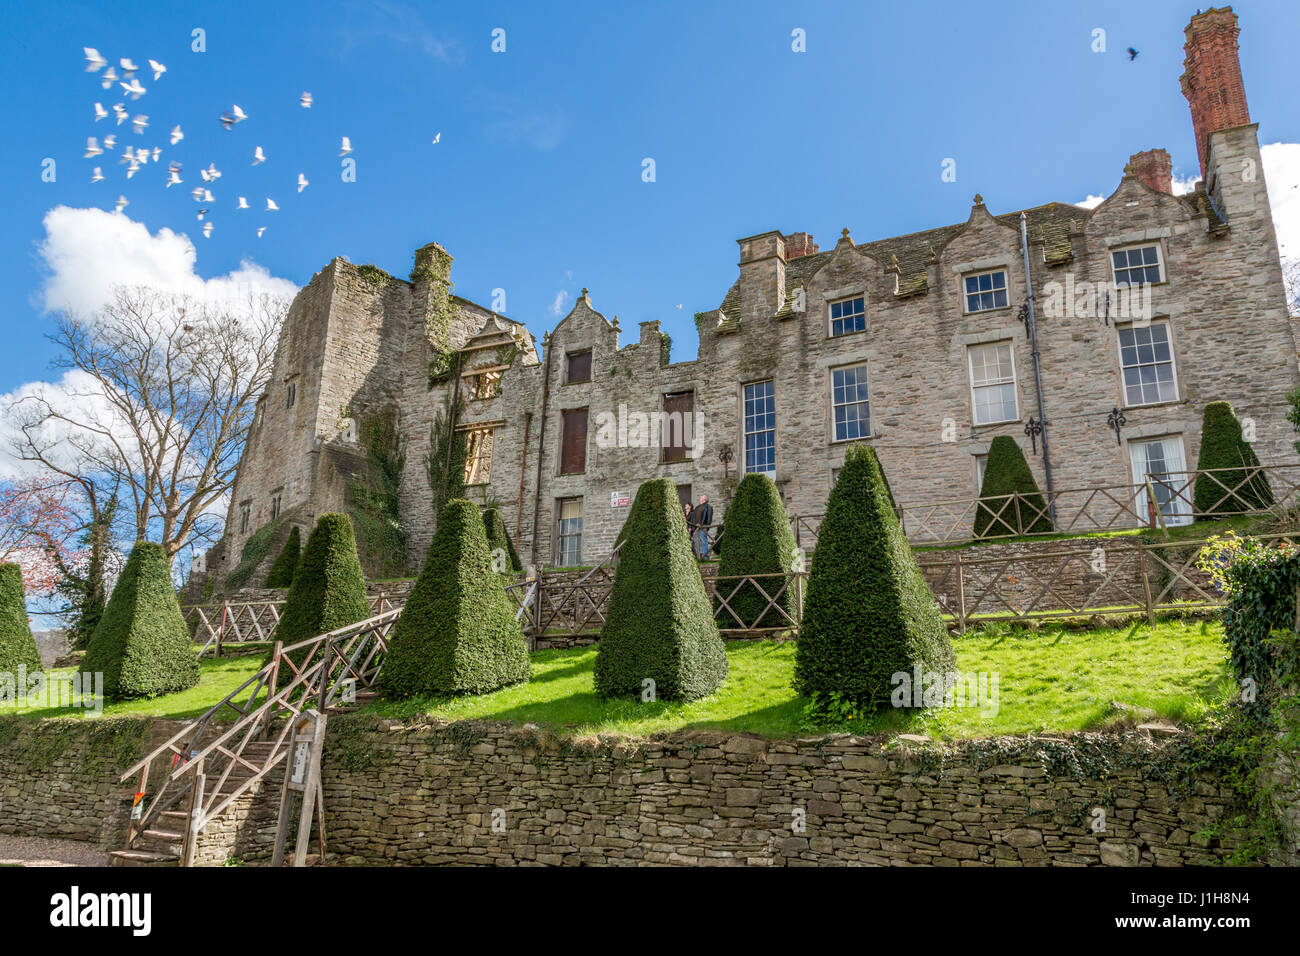 The ruins of Hay Castle, with a flock of white doves flying away,  Hay Castle is a medieval fortification, 17th-century mansion house Hay-on-Wye Wales Stock Photo